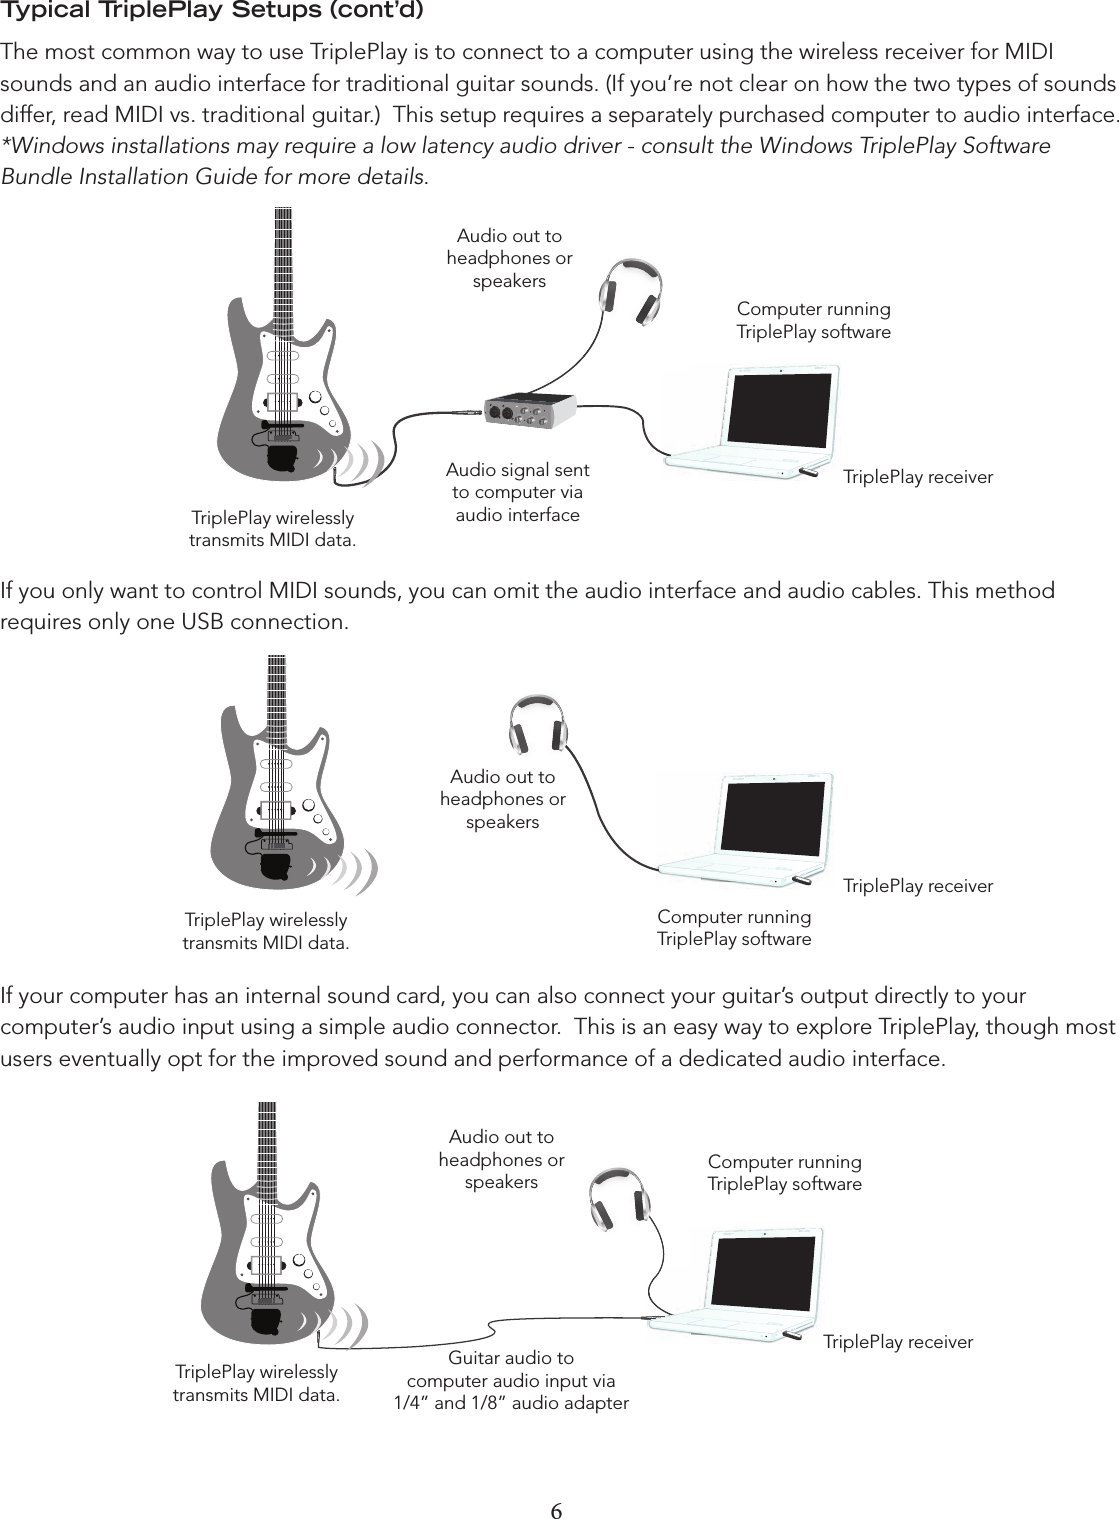 6 7Typical TriplePlay Setups (cont’d)The most common way to use TriplePlay is to connect to a computer using the wireless receiver for MIDI sounds and an audio interface for traditional guitar sounds. (If you’re not clear on how the two types of sounds differ, read MIDI vs. traditional guitar.)  This setup requires a separately purchased computer to audio interface.  *Windows installations may require a low latency audio driver - consult the Windows TriplePlay Software Bundle Installation Guide for more details.  If you only want to control MIDI sounds, you can omit the audio interface and audio cables. This method requires only one USB connection.If your computer has an internal sound card, you can also connect your guitar’s output directly to your computer’s audio input using a simple audio connector.  This is an easy way to explore TriplePlay, though most users eventually opt for the improved sound and performance of a dedicated audio interface.TriplePlay wirelessly  transmits MIDI data. Audio signal sent  to computer via  audio interfaceTriplePlay receiverComputer runningTriplePlay softwareAudio out to headphones or speakers Computer runningTriplePlay softwareTriplePlay wirelessly  transmits MIDI data. TriplePlay receiverAudio out to headphones or speakers TriplePlay receiverGuitar audio tocomputer audio input via1/4” and 1/8” audio adapterTriplePlay wirelessly  transmits MIDI data. Computer runningTriplePlay softwareAudio out to headphones or speakers 